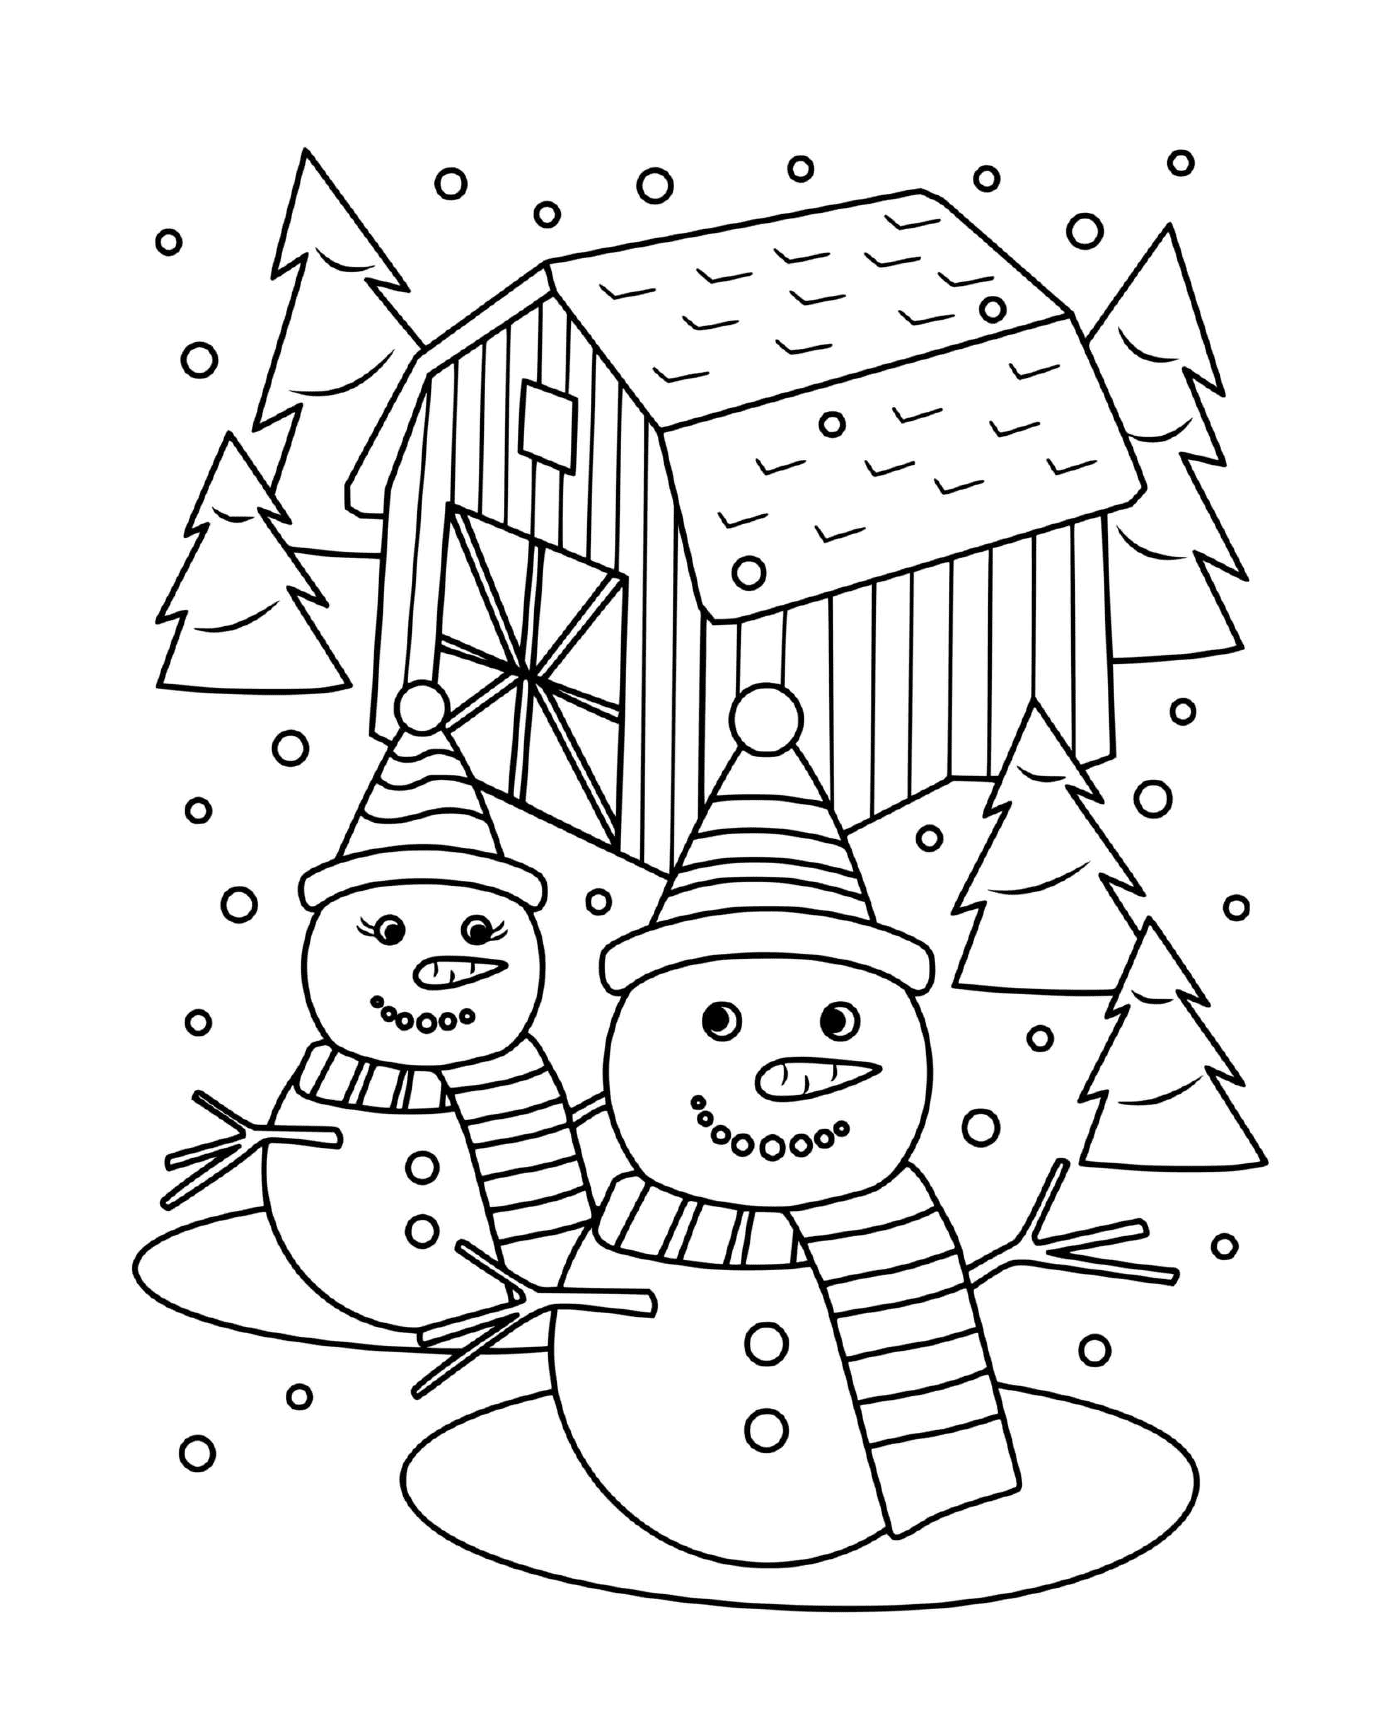  A snowman and a snow lady surrounded by fir trees 